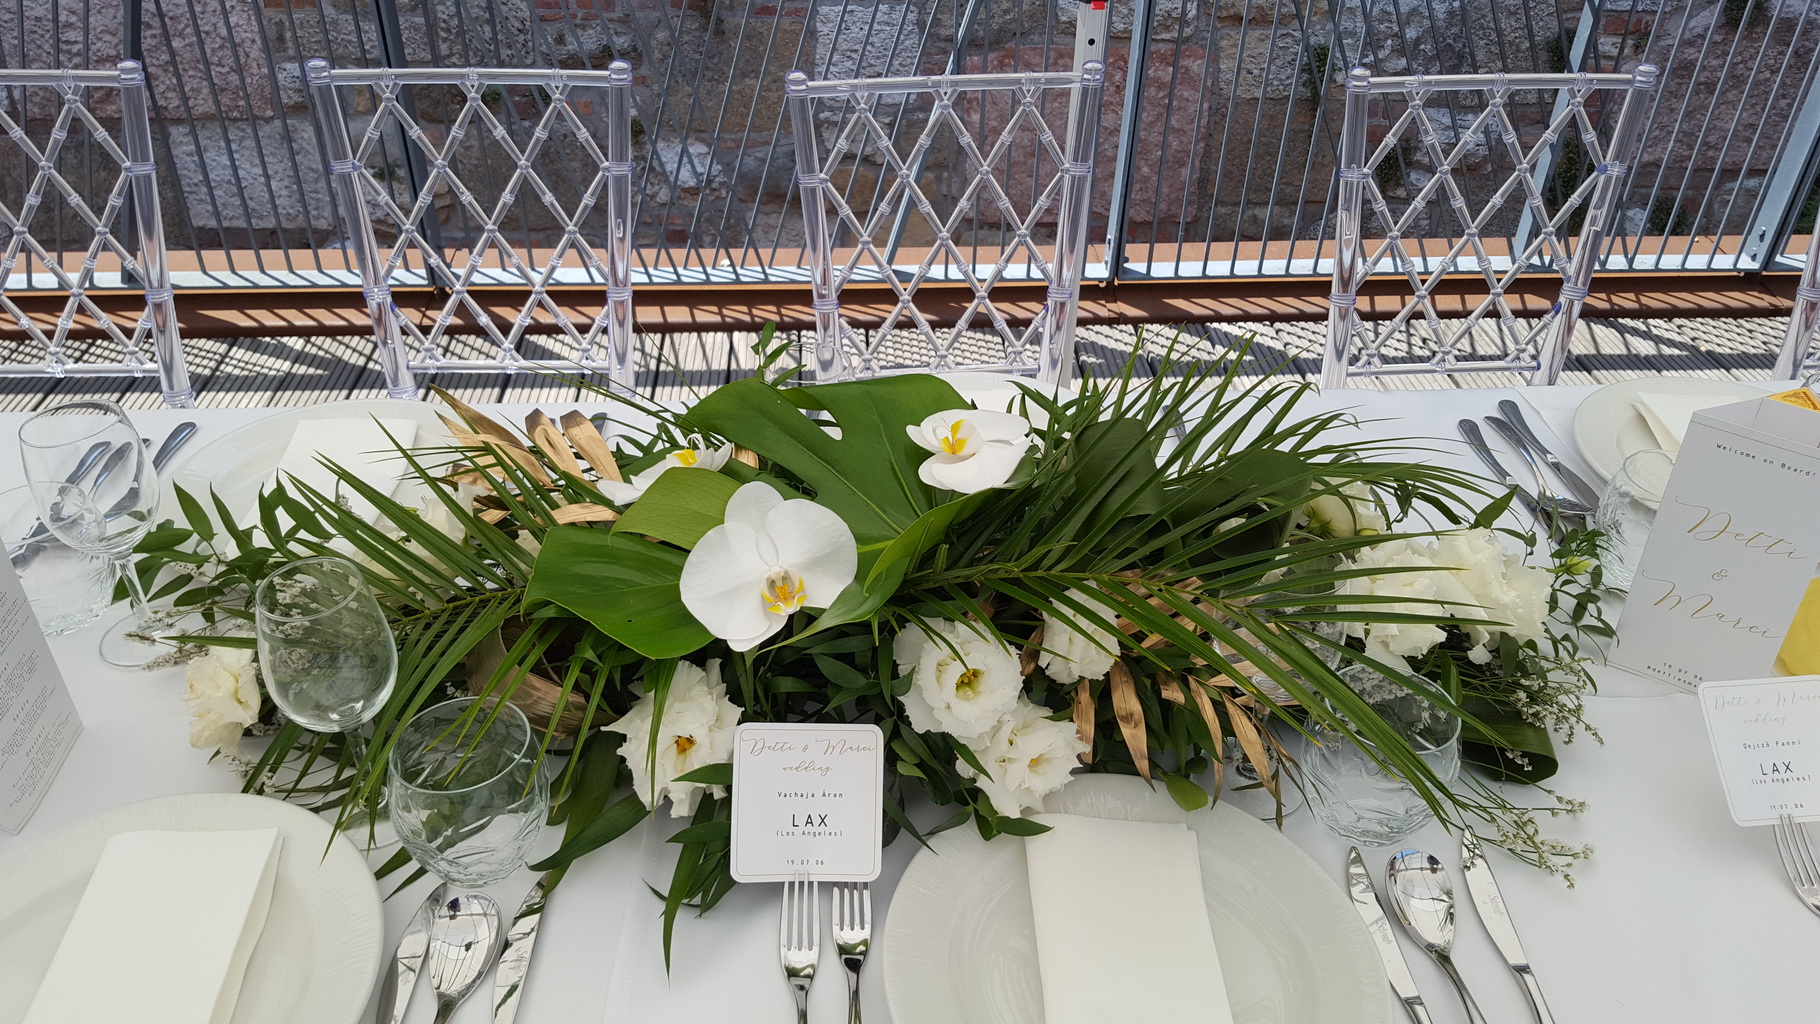 flower delivery Budapest - Elongated wedding centerpiece, Bazaar Eclectica Café and Restaurant, Budapest(phalaenopsis orchid, lisianthus, monstera leaf, palm leaf, white, green, gold)